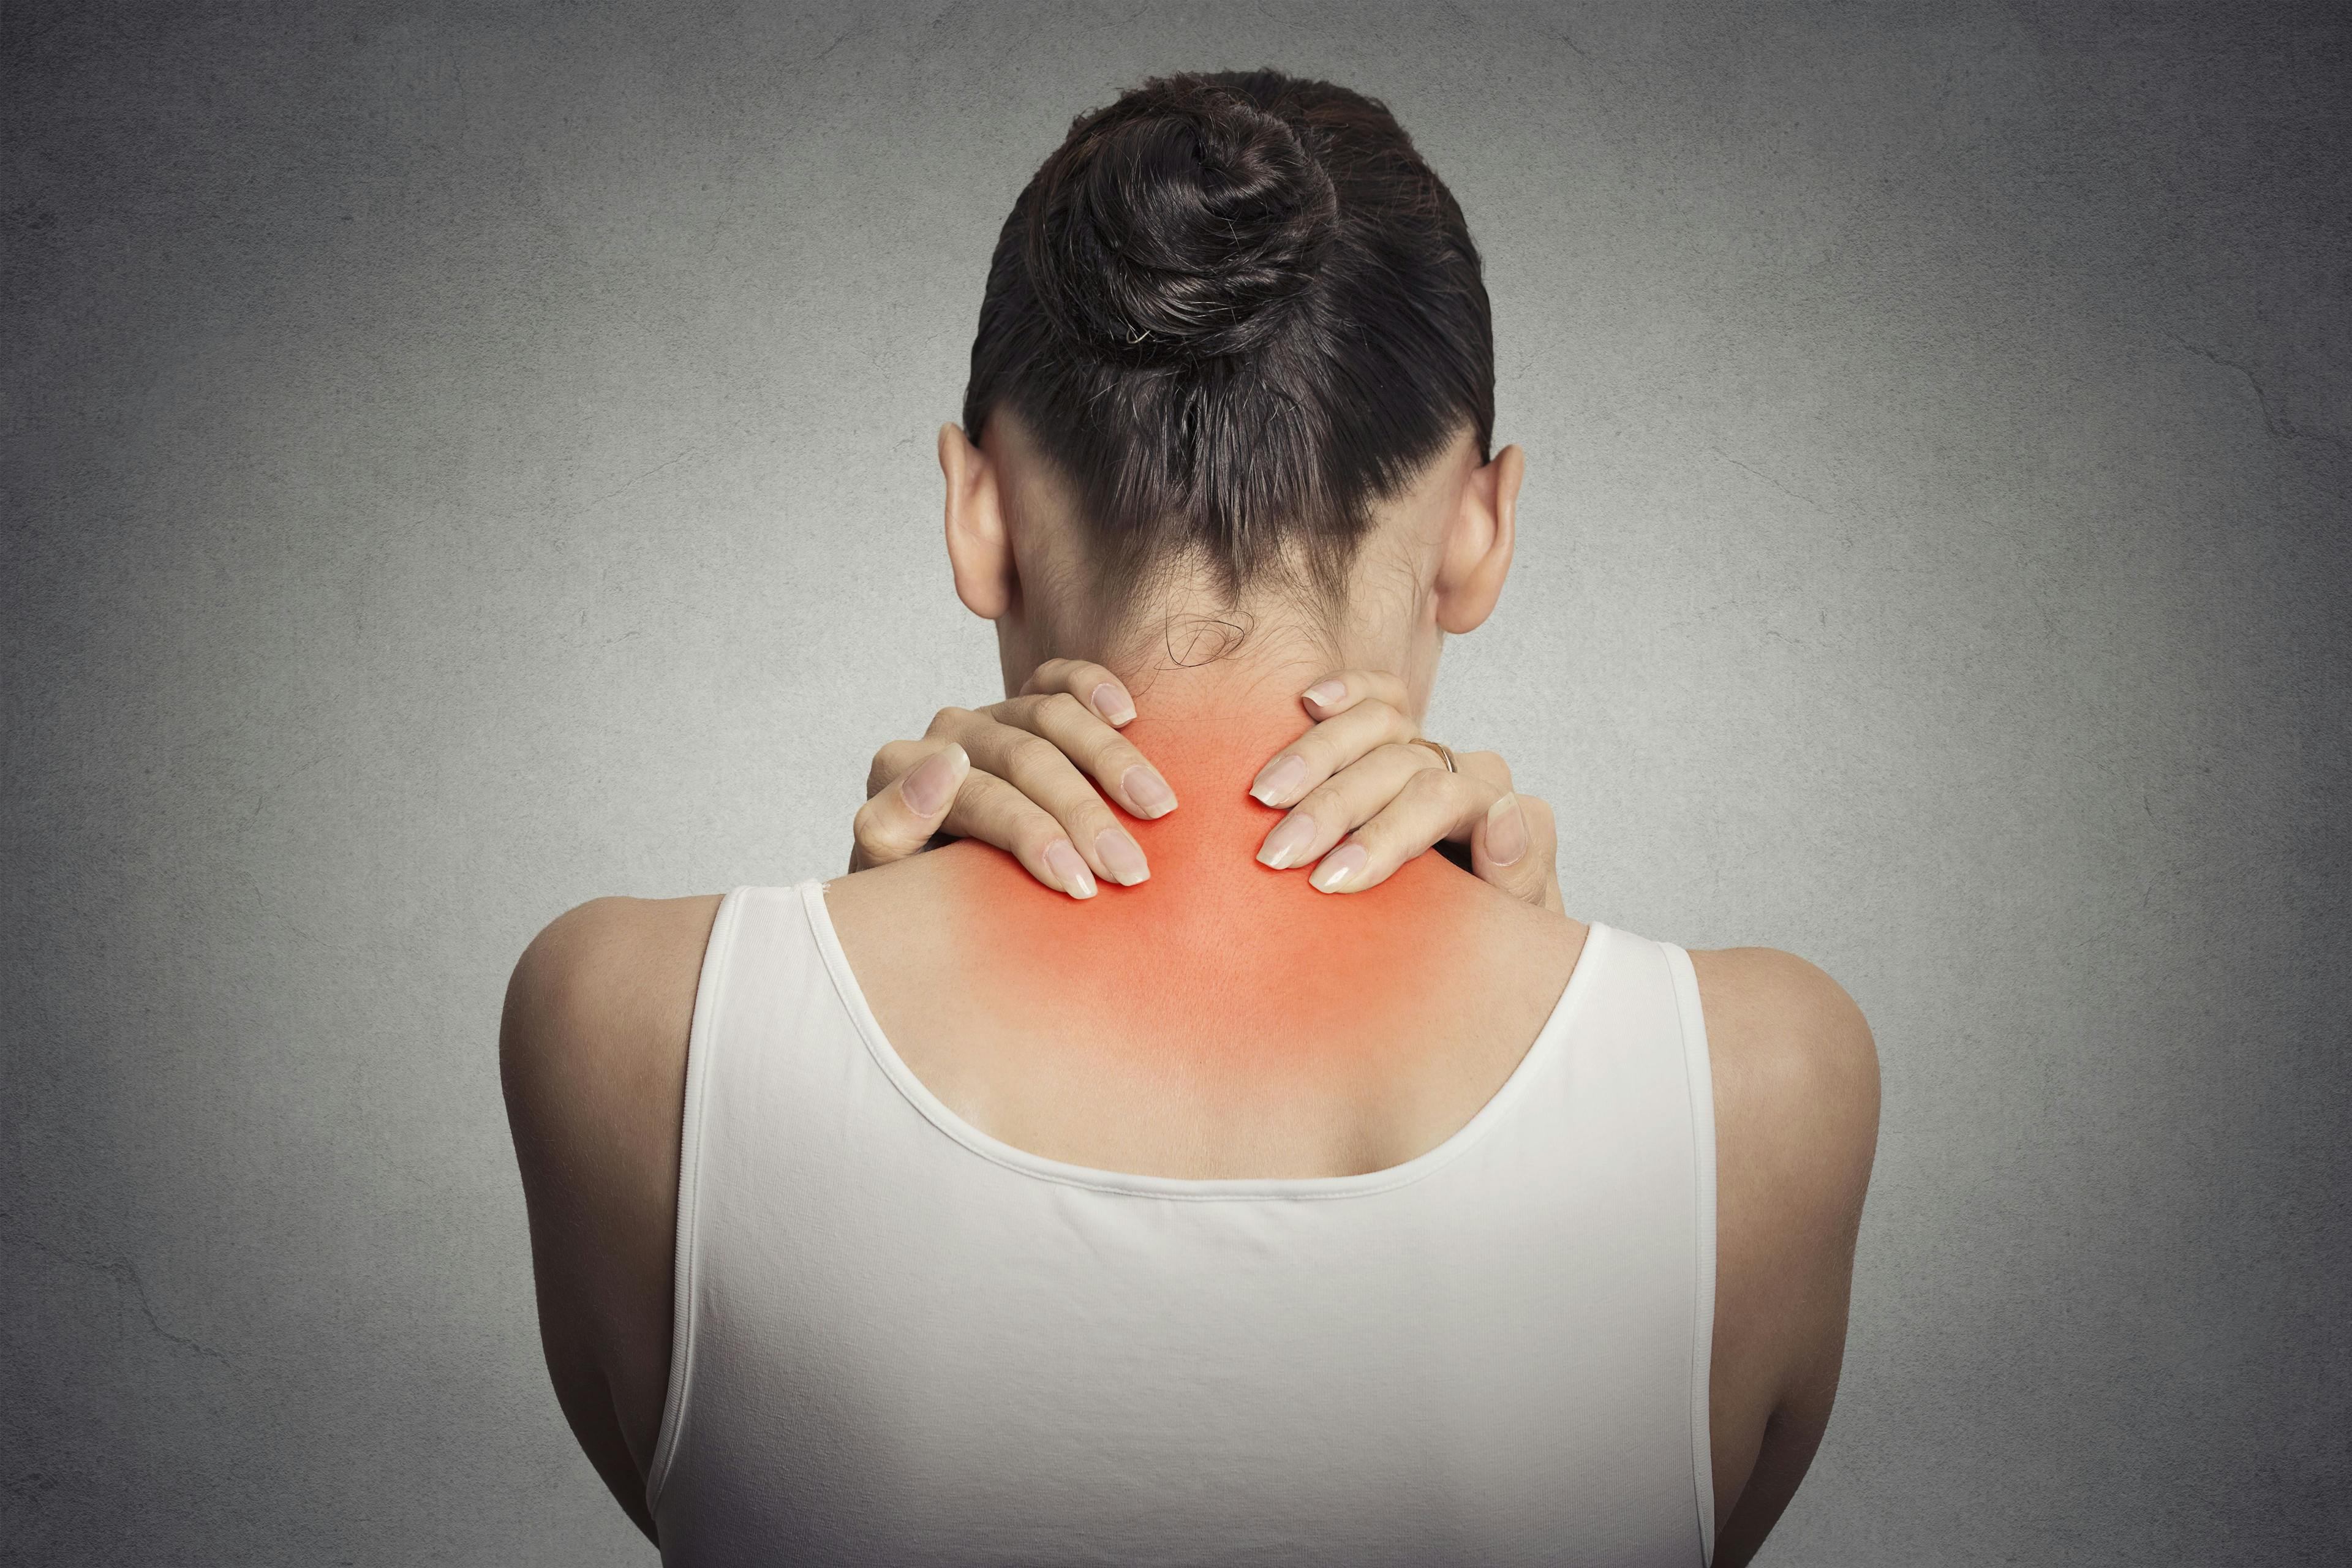 Fibromyalgia: What It Is and How to Treat It